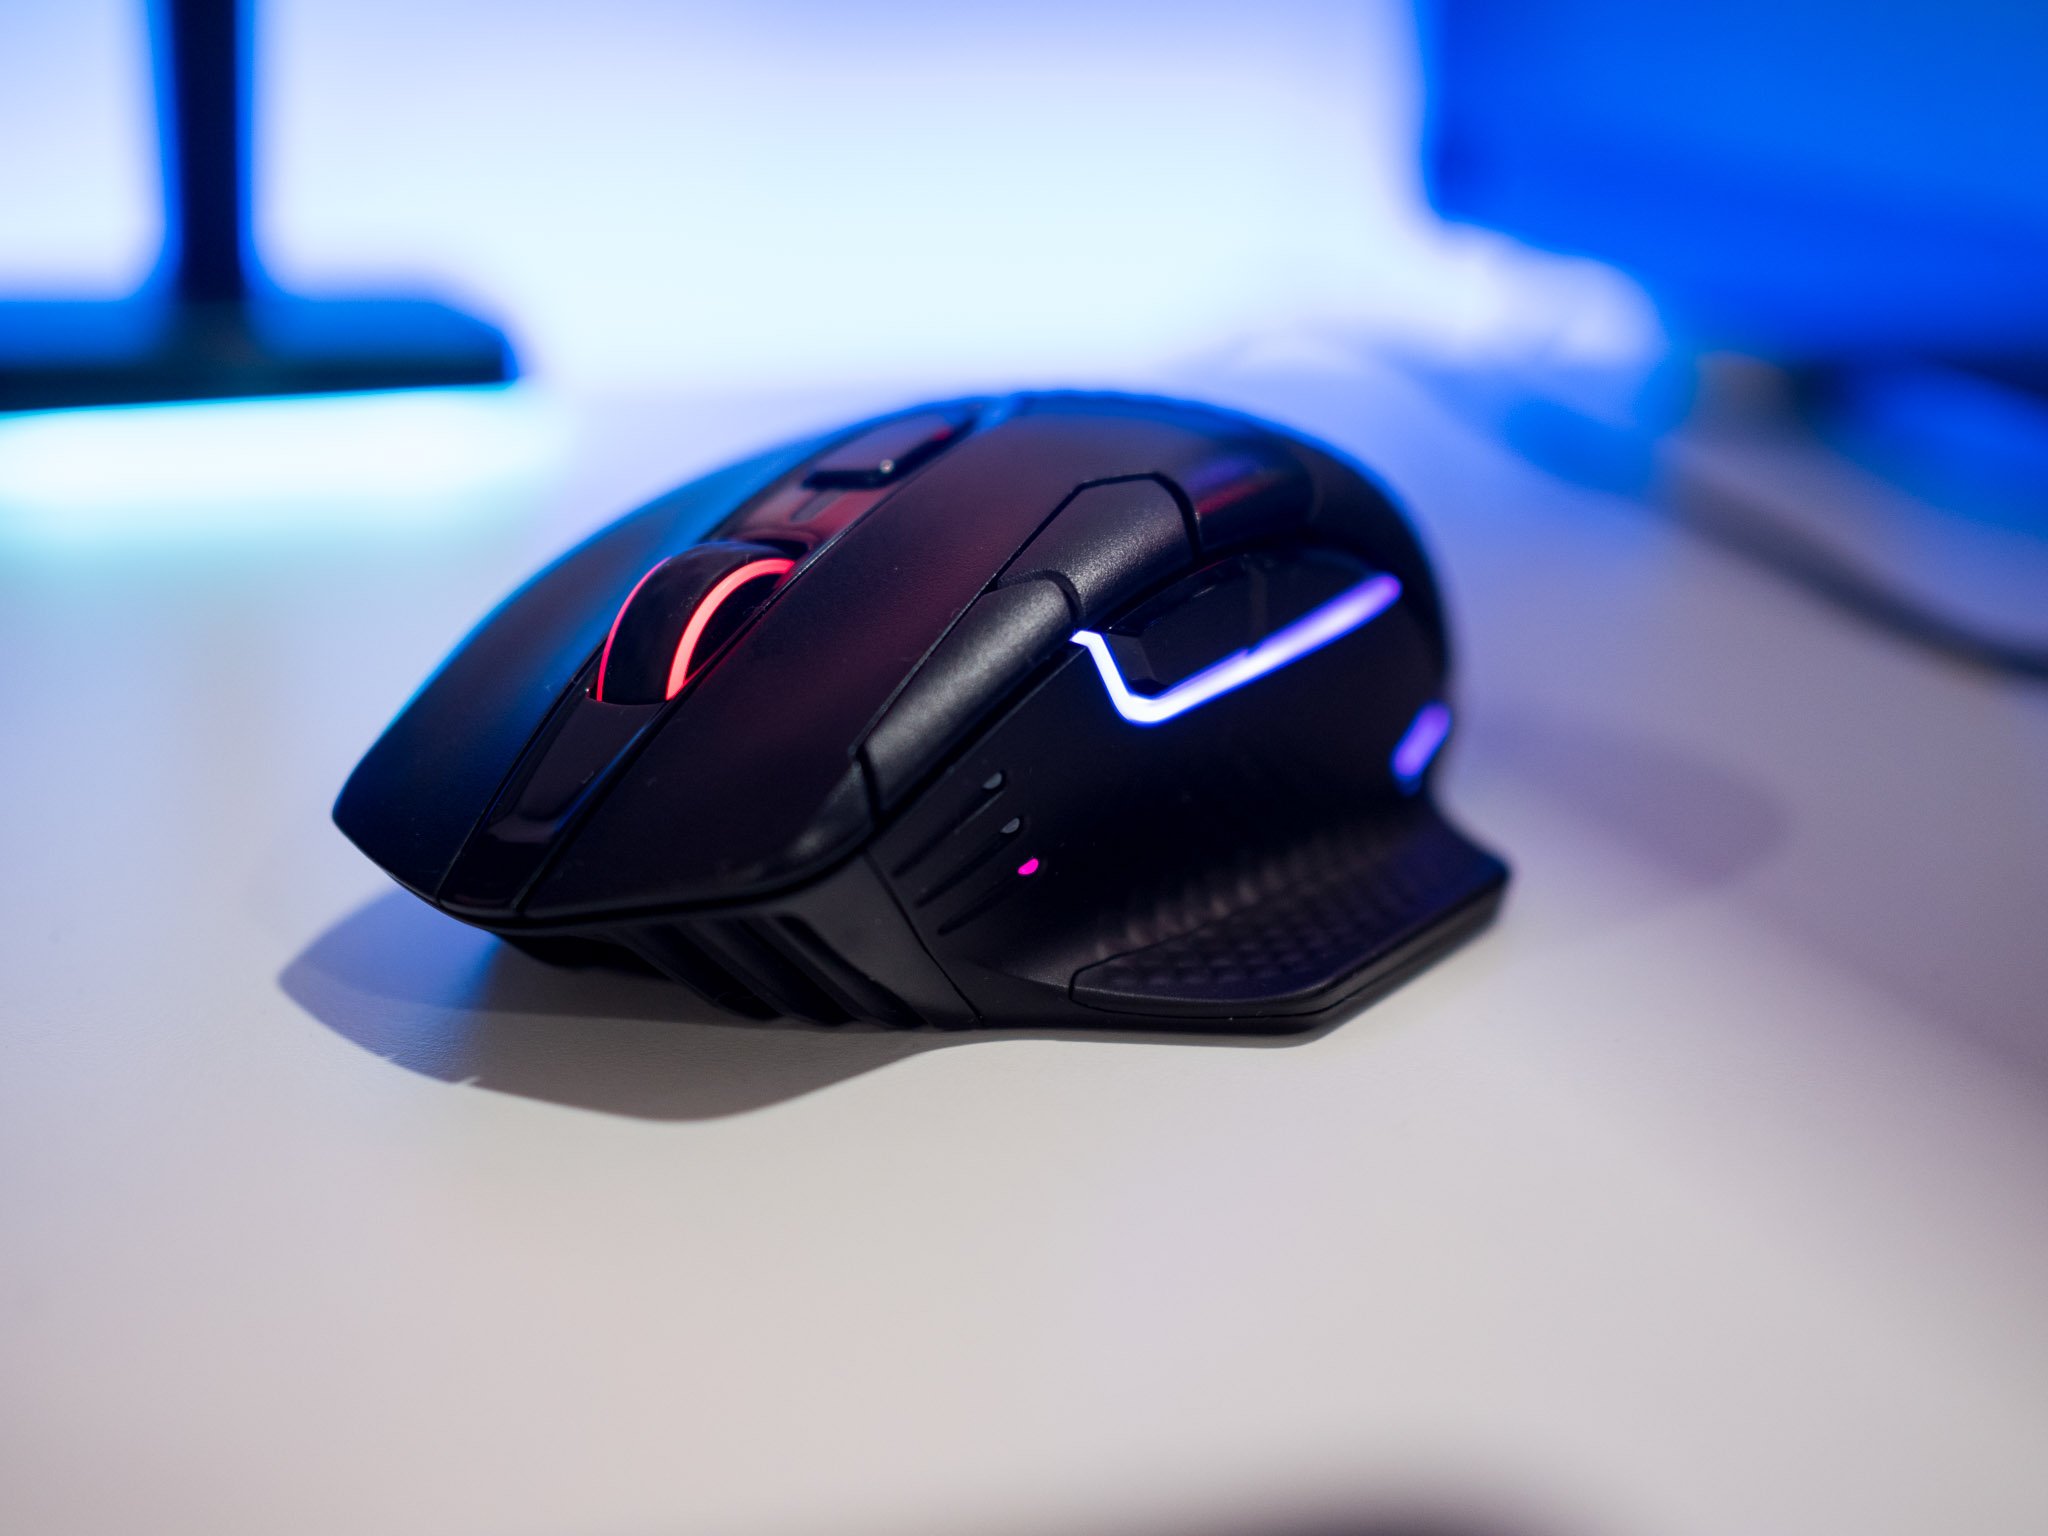 Corsair Dark Core RGB Pro review: My new favorite gaming mouse